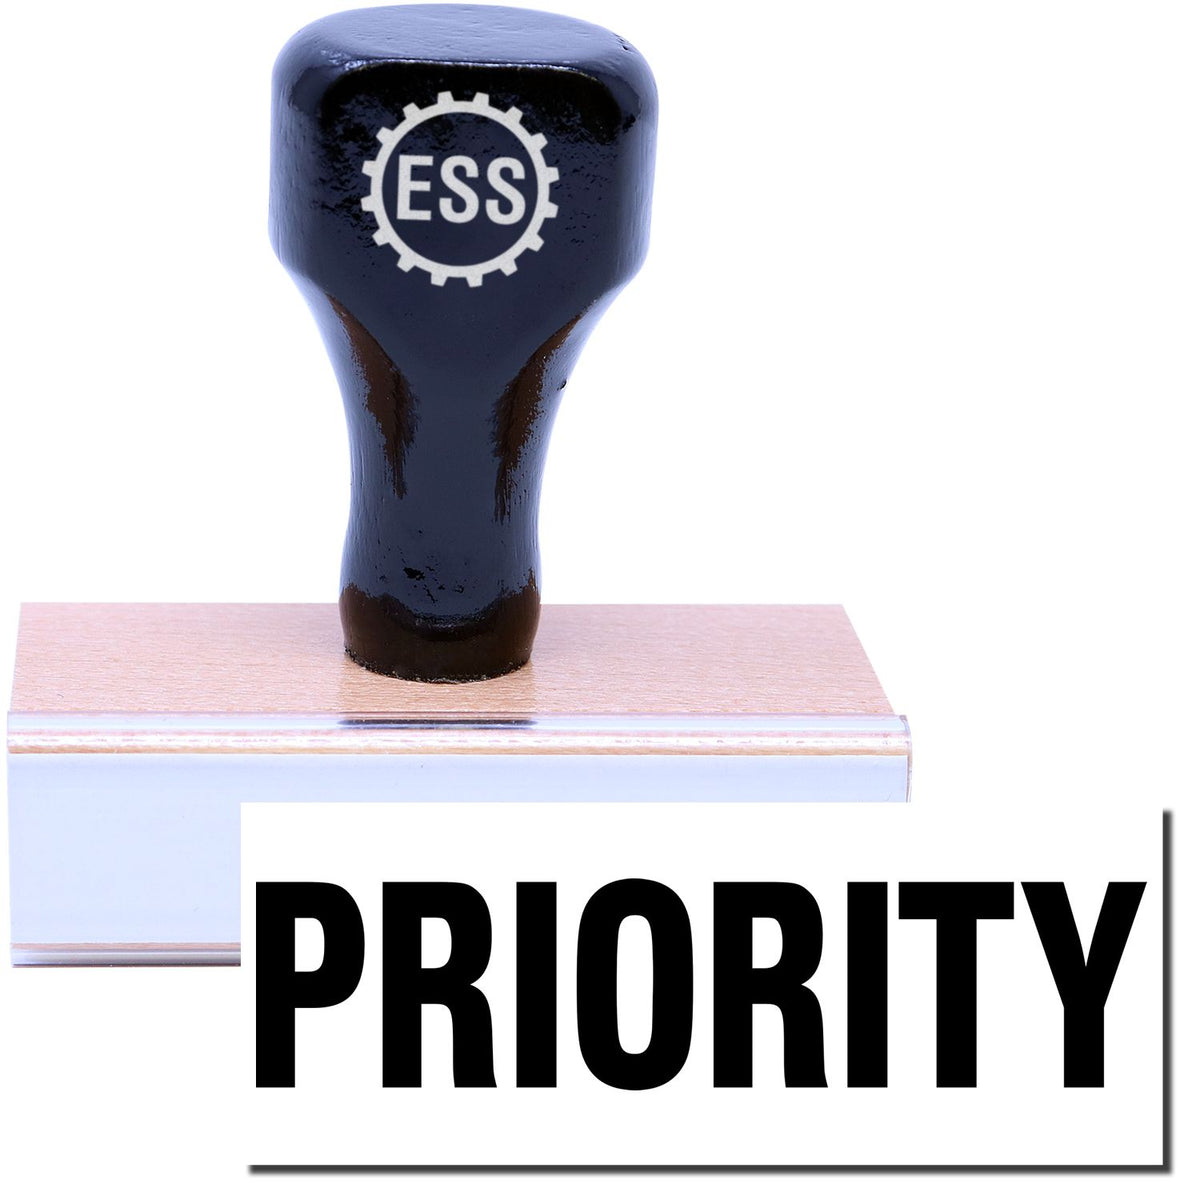 A stock office rubber stamp with a stamped image showing how the text &quot;PRIORITY&quot; in bold font is displayed after stamping.